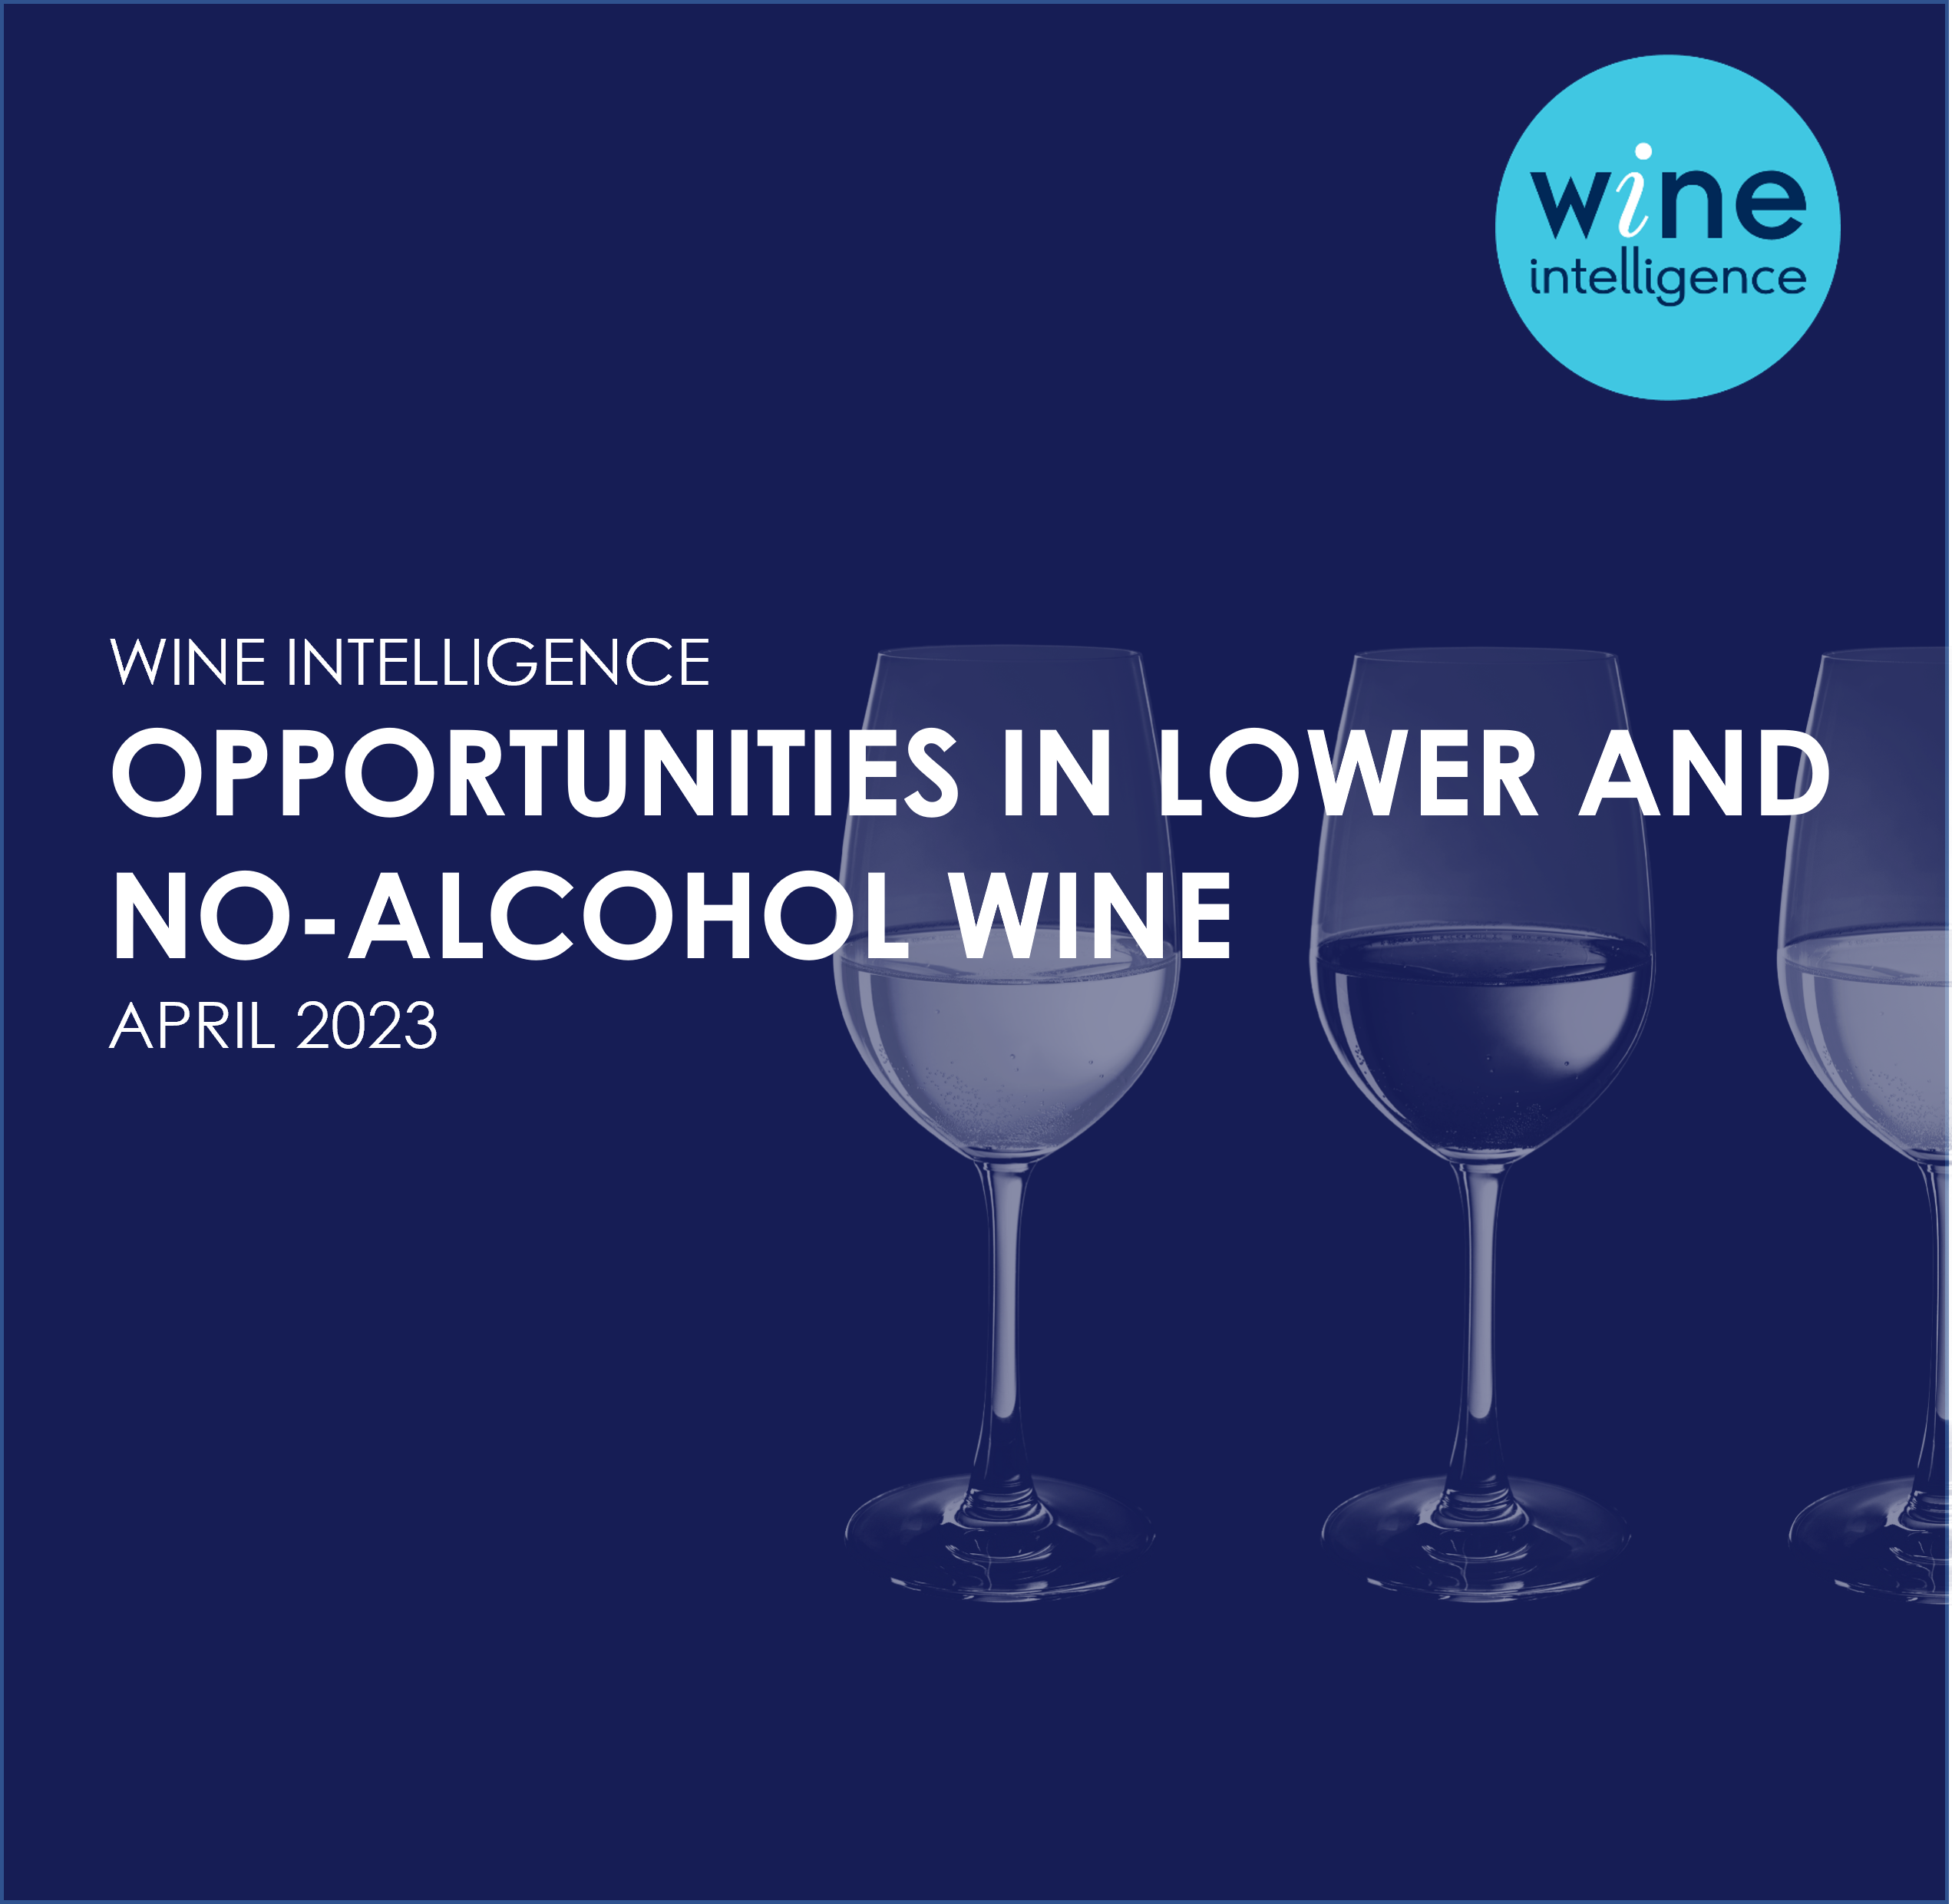 Opportunities in Lower and No alcohol wine 2023.jpg - Special Interest Reports